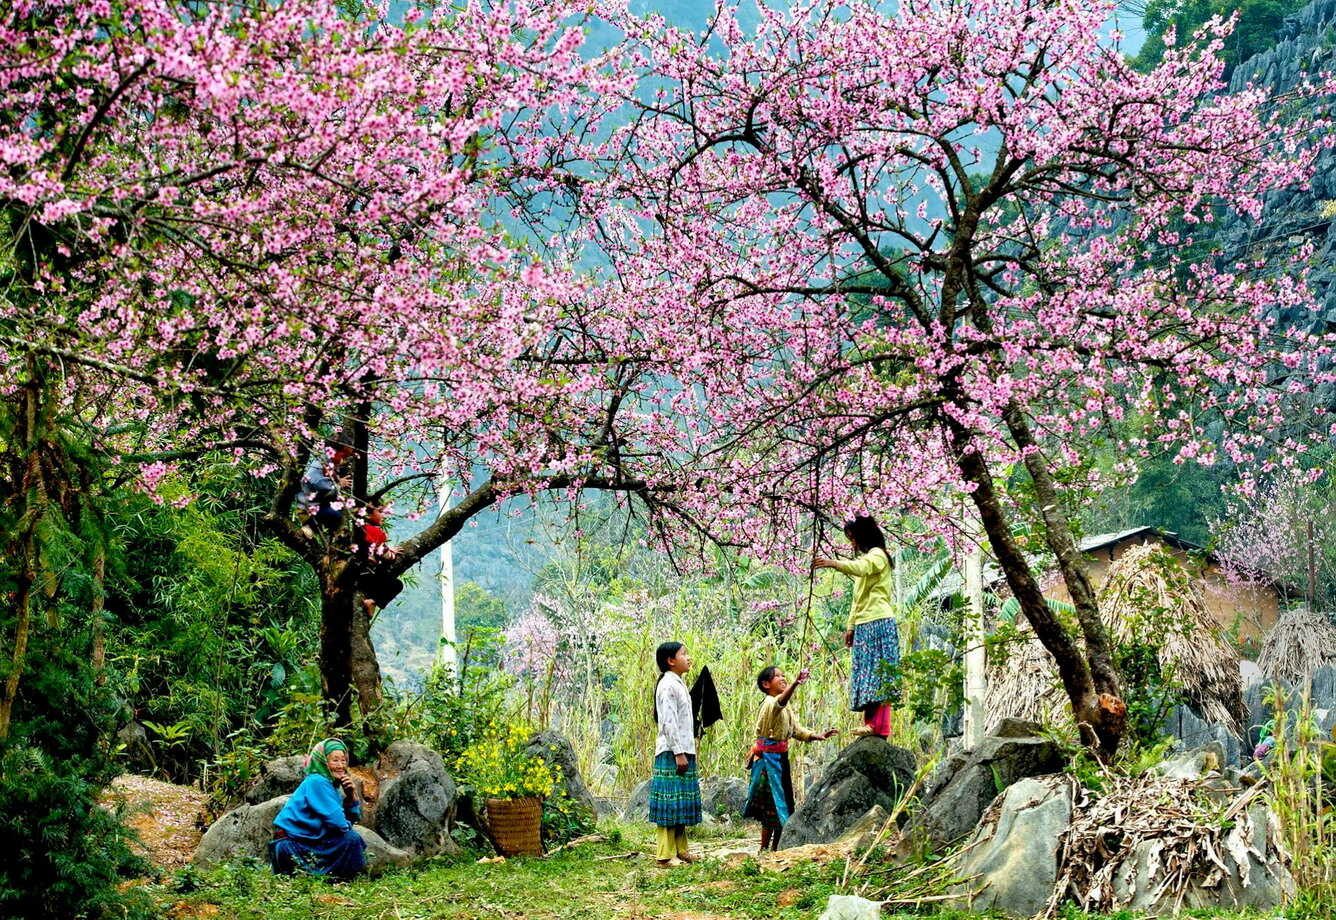 Coming to Sapa heaven gate in the early spring days of February, you will have the opportunity to see the scenery of wild peach blossoms blooming on both sides of the road.